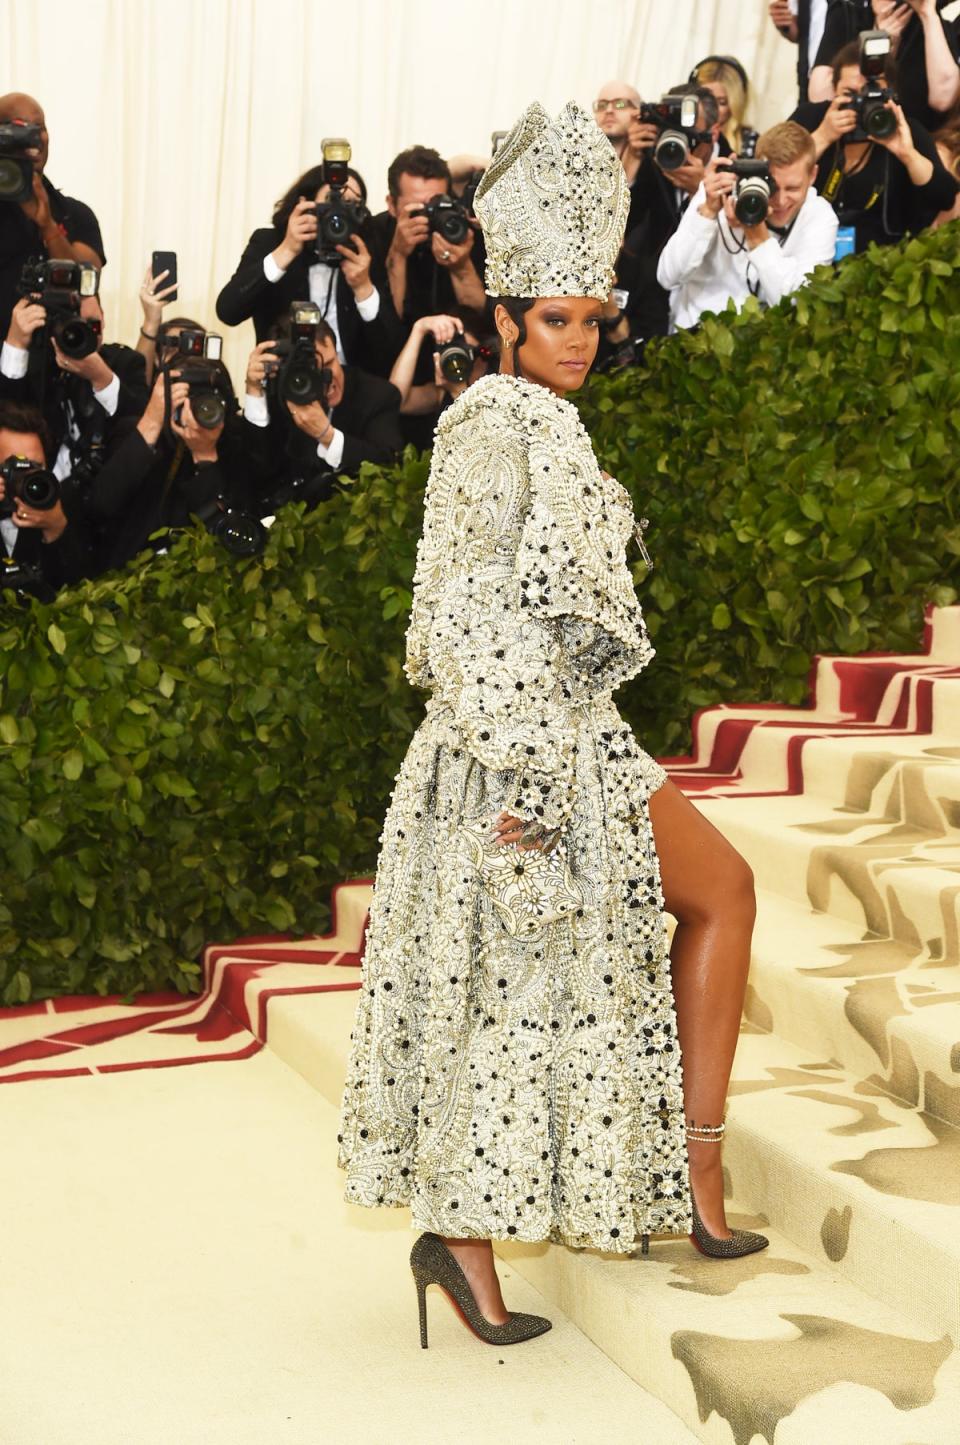 Rihanna attends the Heavenly Bodies: Fashion & The Catholic Imagination Met Gala, 2018 (Getty Images)